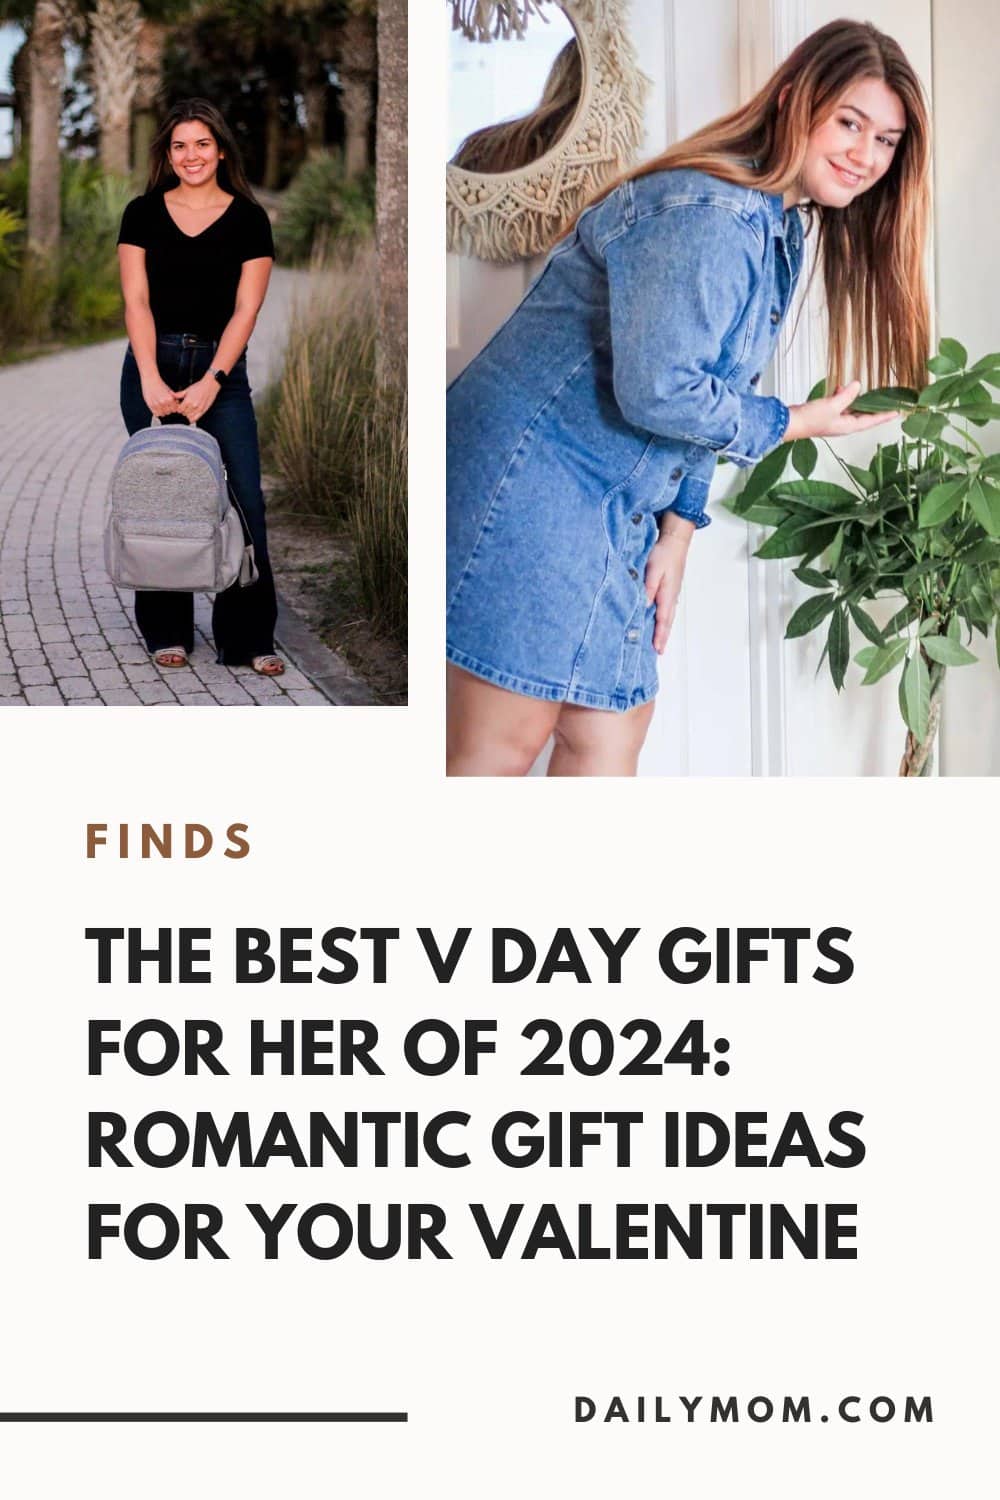 Daily Mom Parent Portal Best V Day Gifts For Her